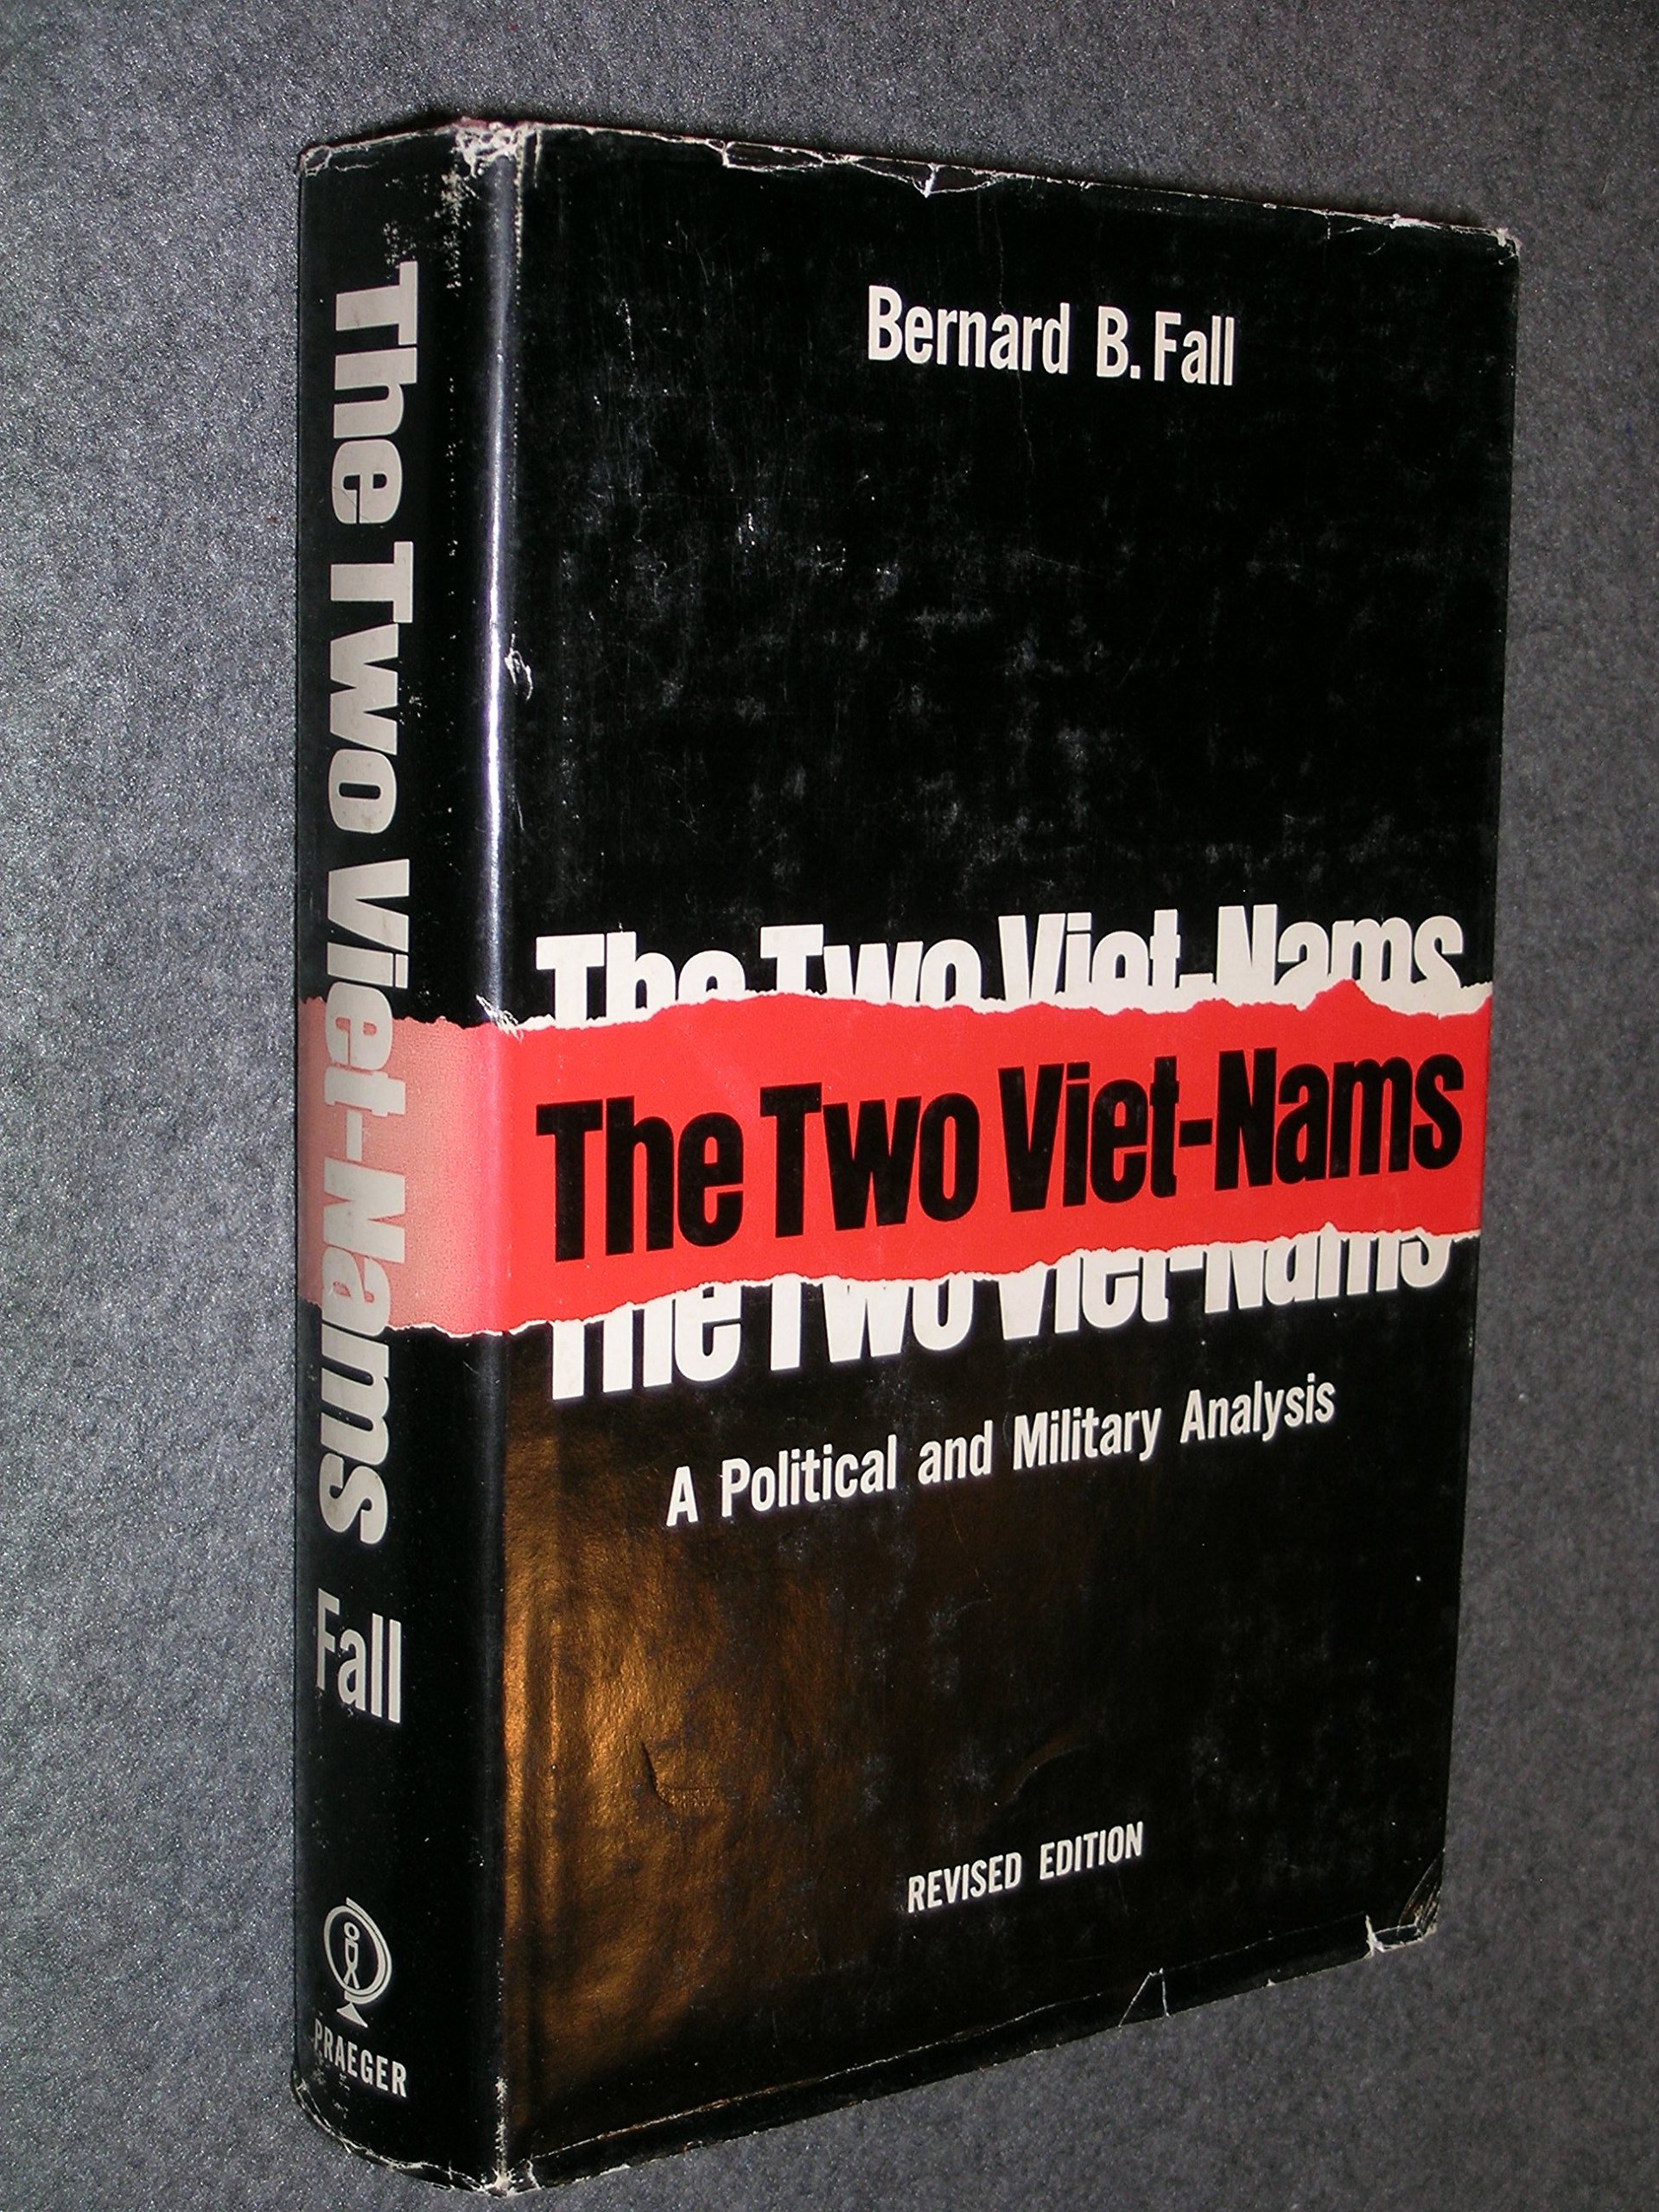 The Two Viet- Nams: A Political and Military Analysis